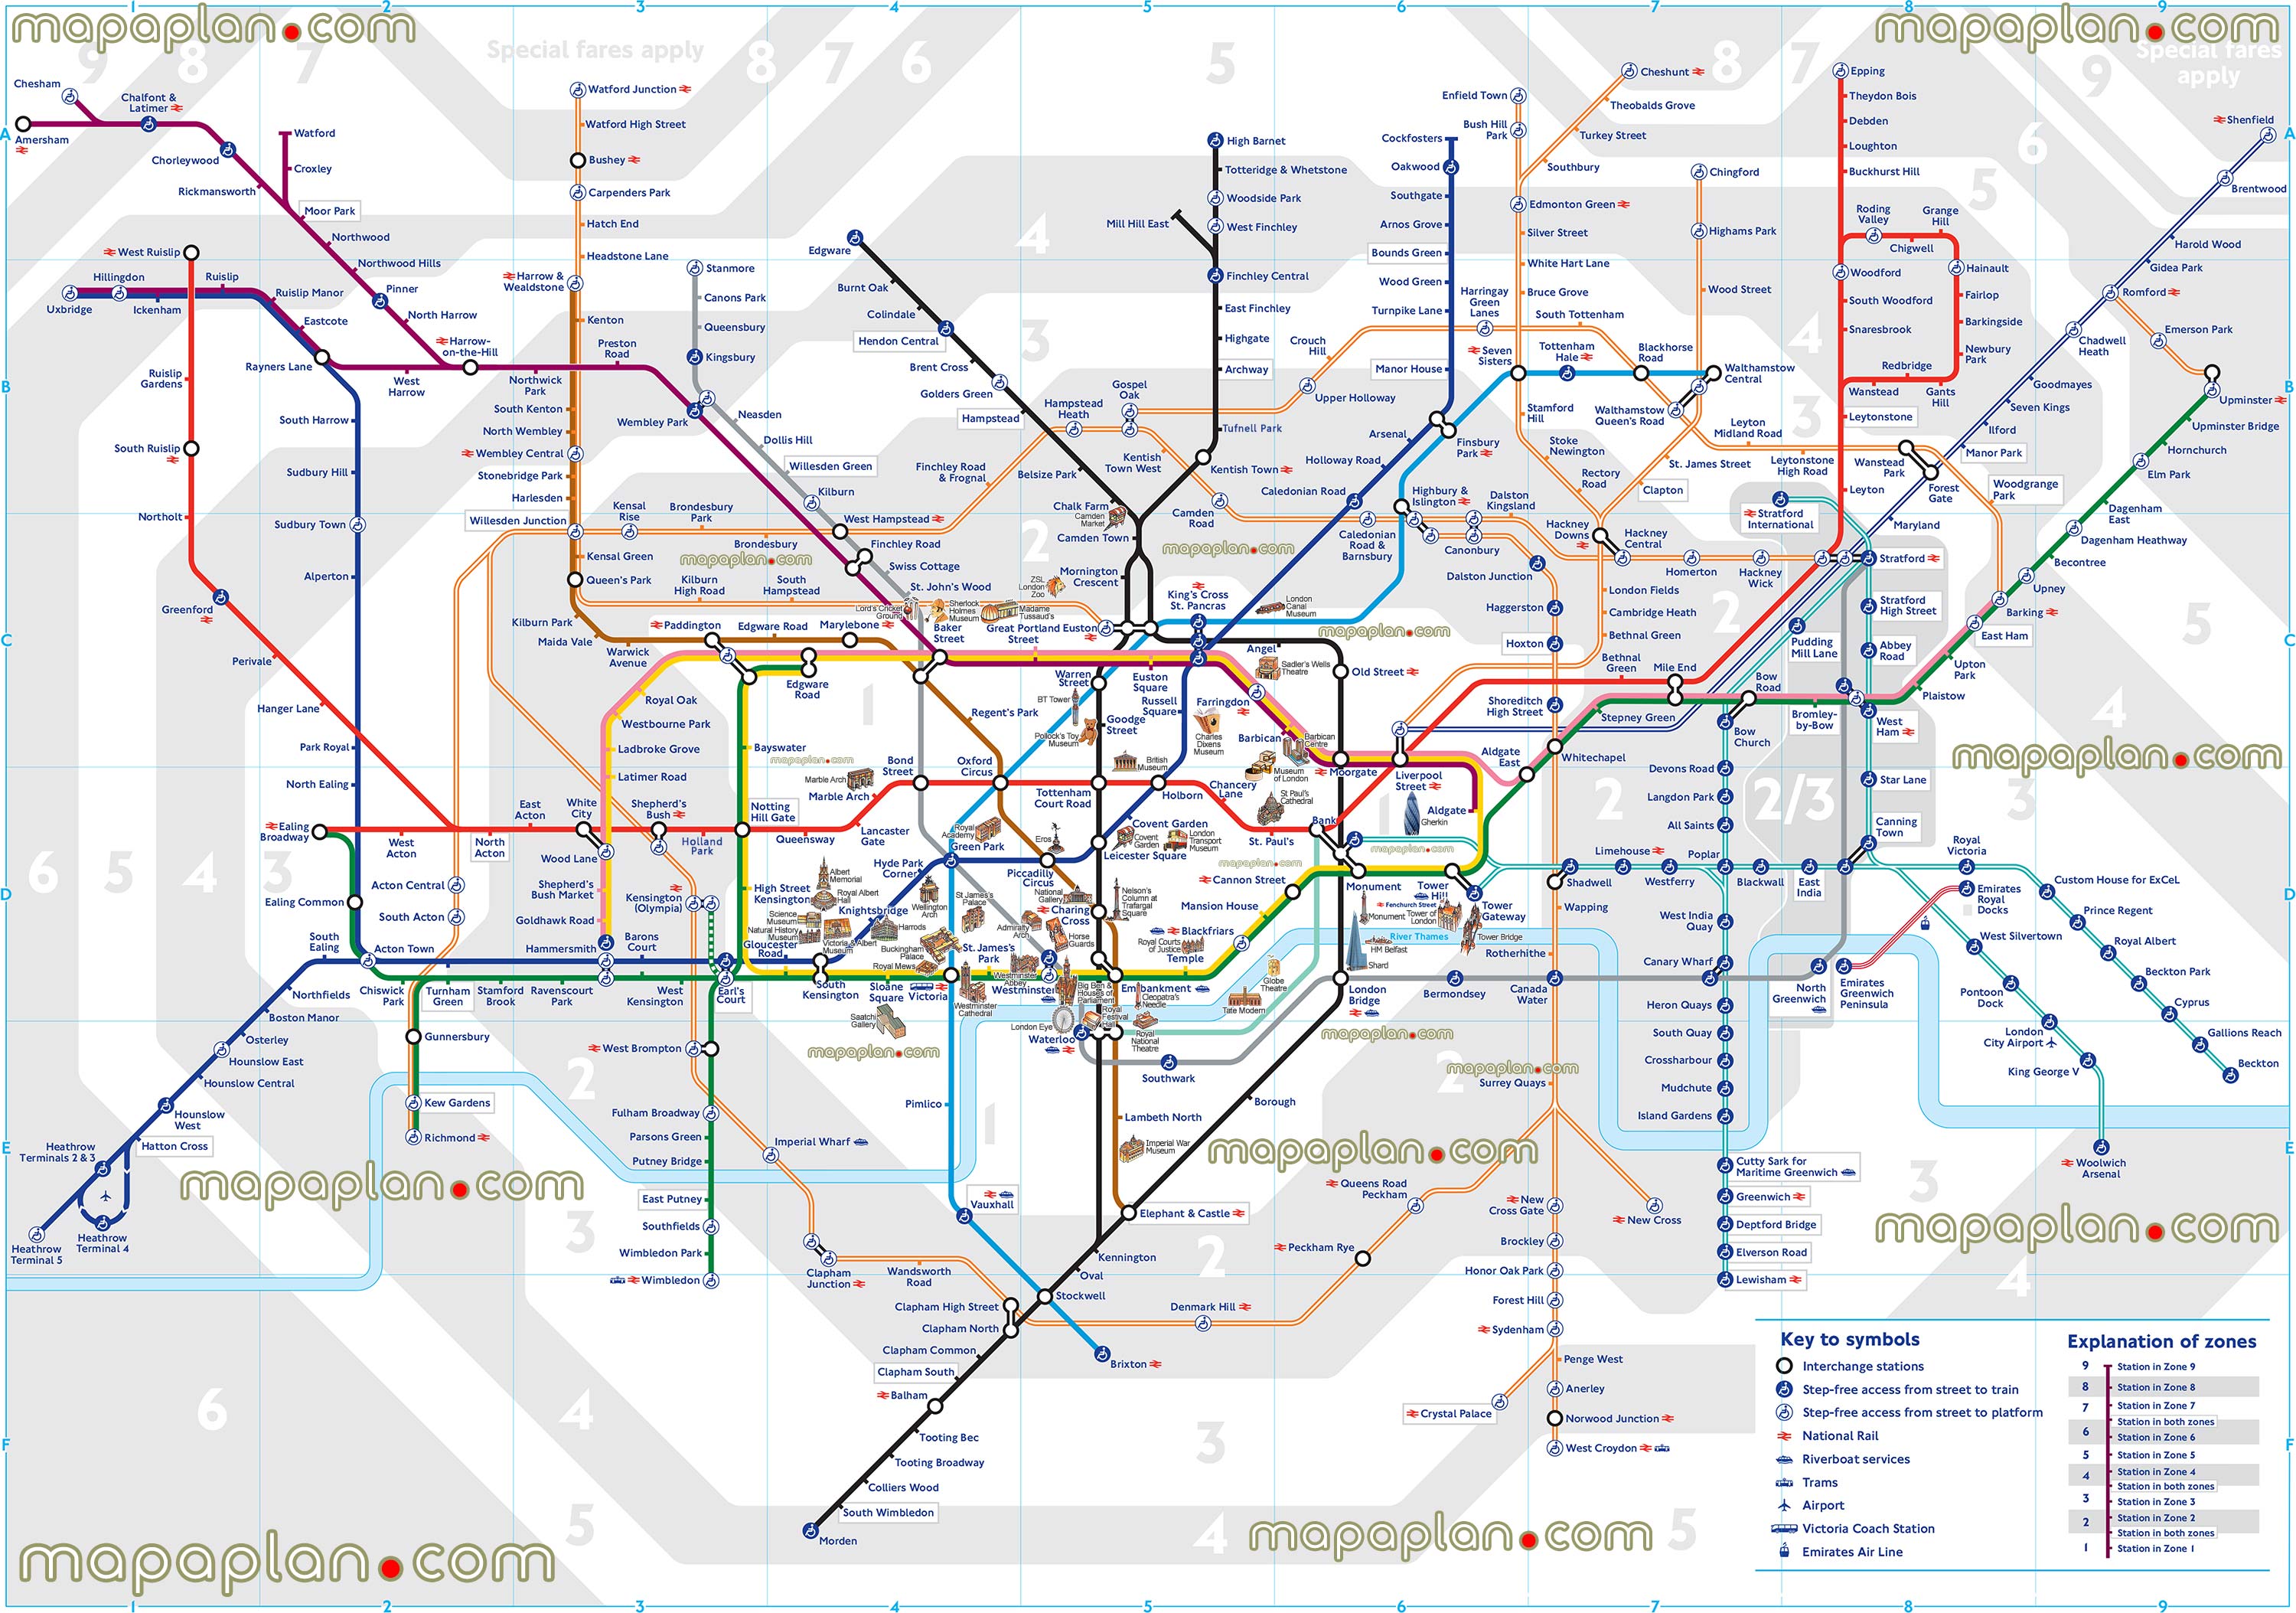 London tube underground stations zones marked public transportation system heathrow airport overground metro routes subway rail lines network diagram railway transit stops commuter dlr light train transports London Top tourist attractions map